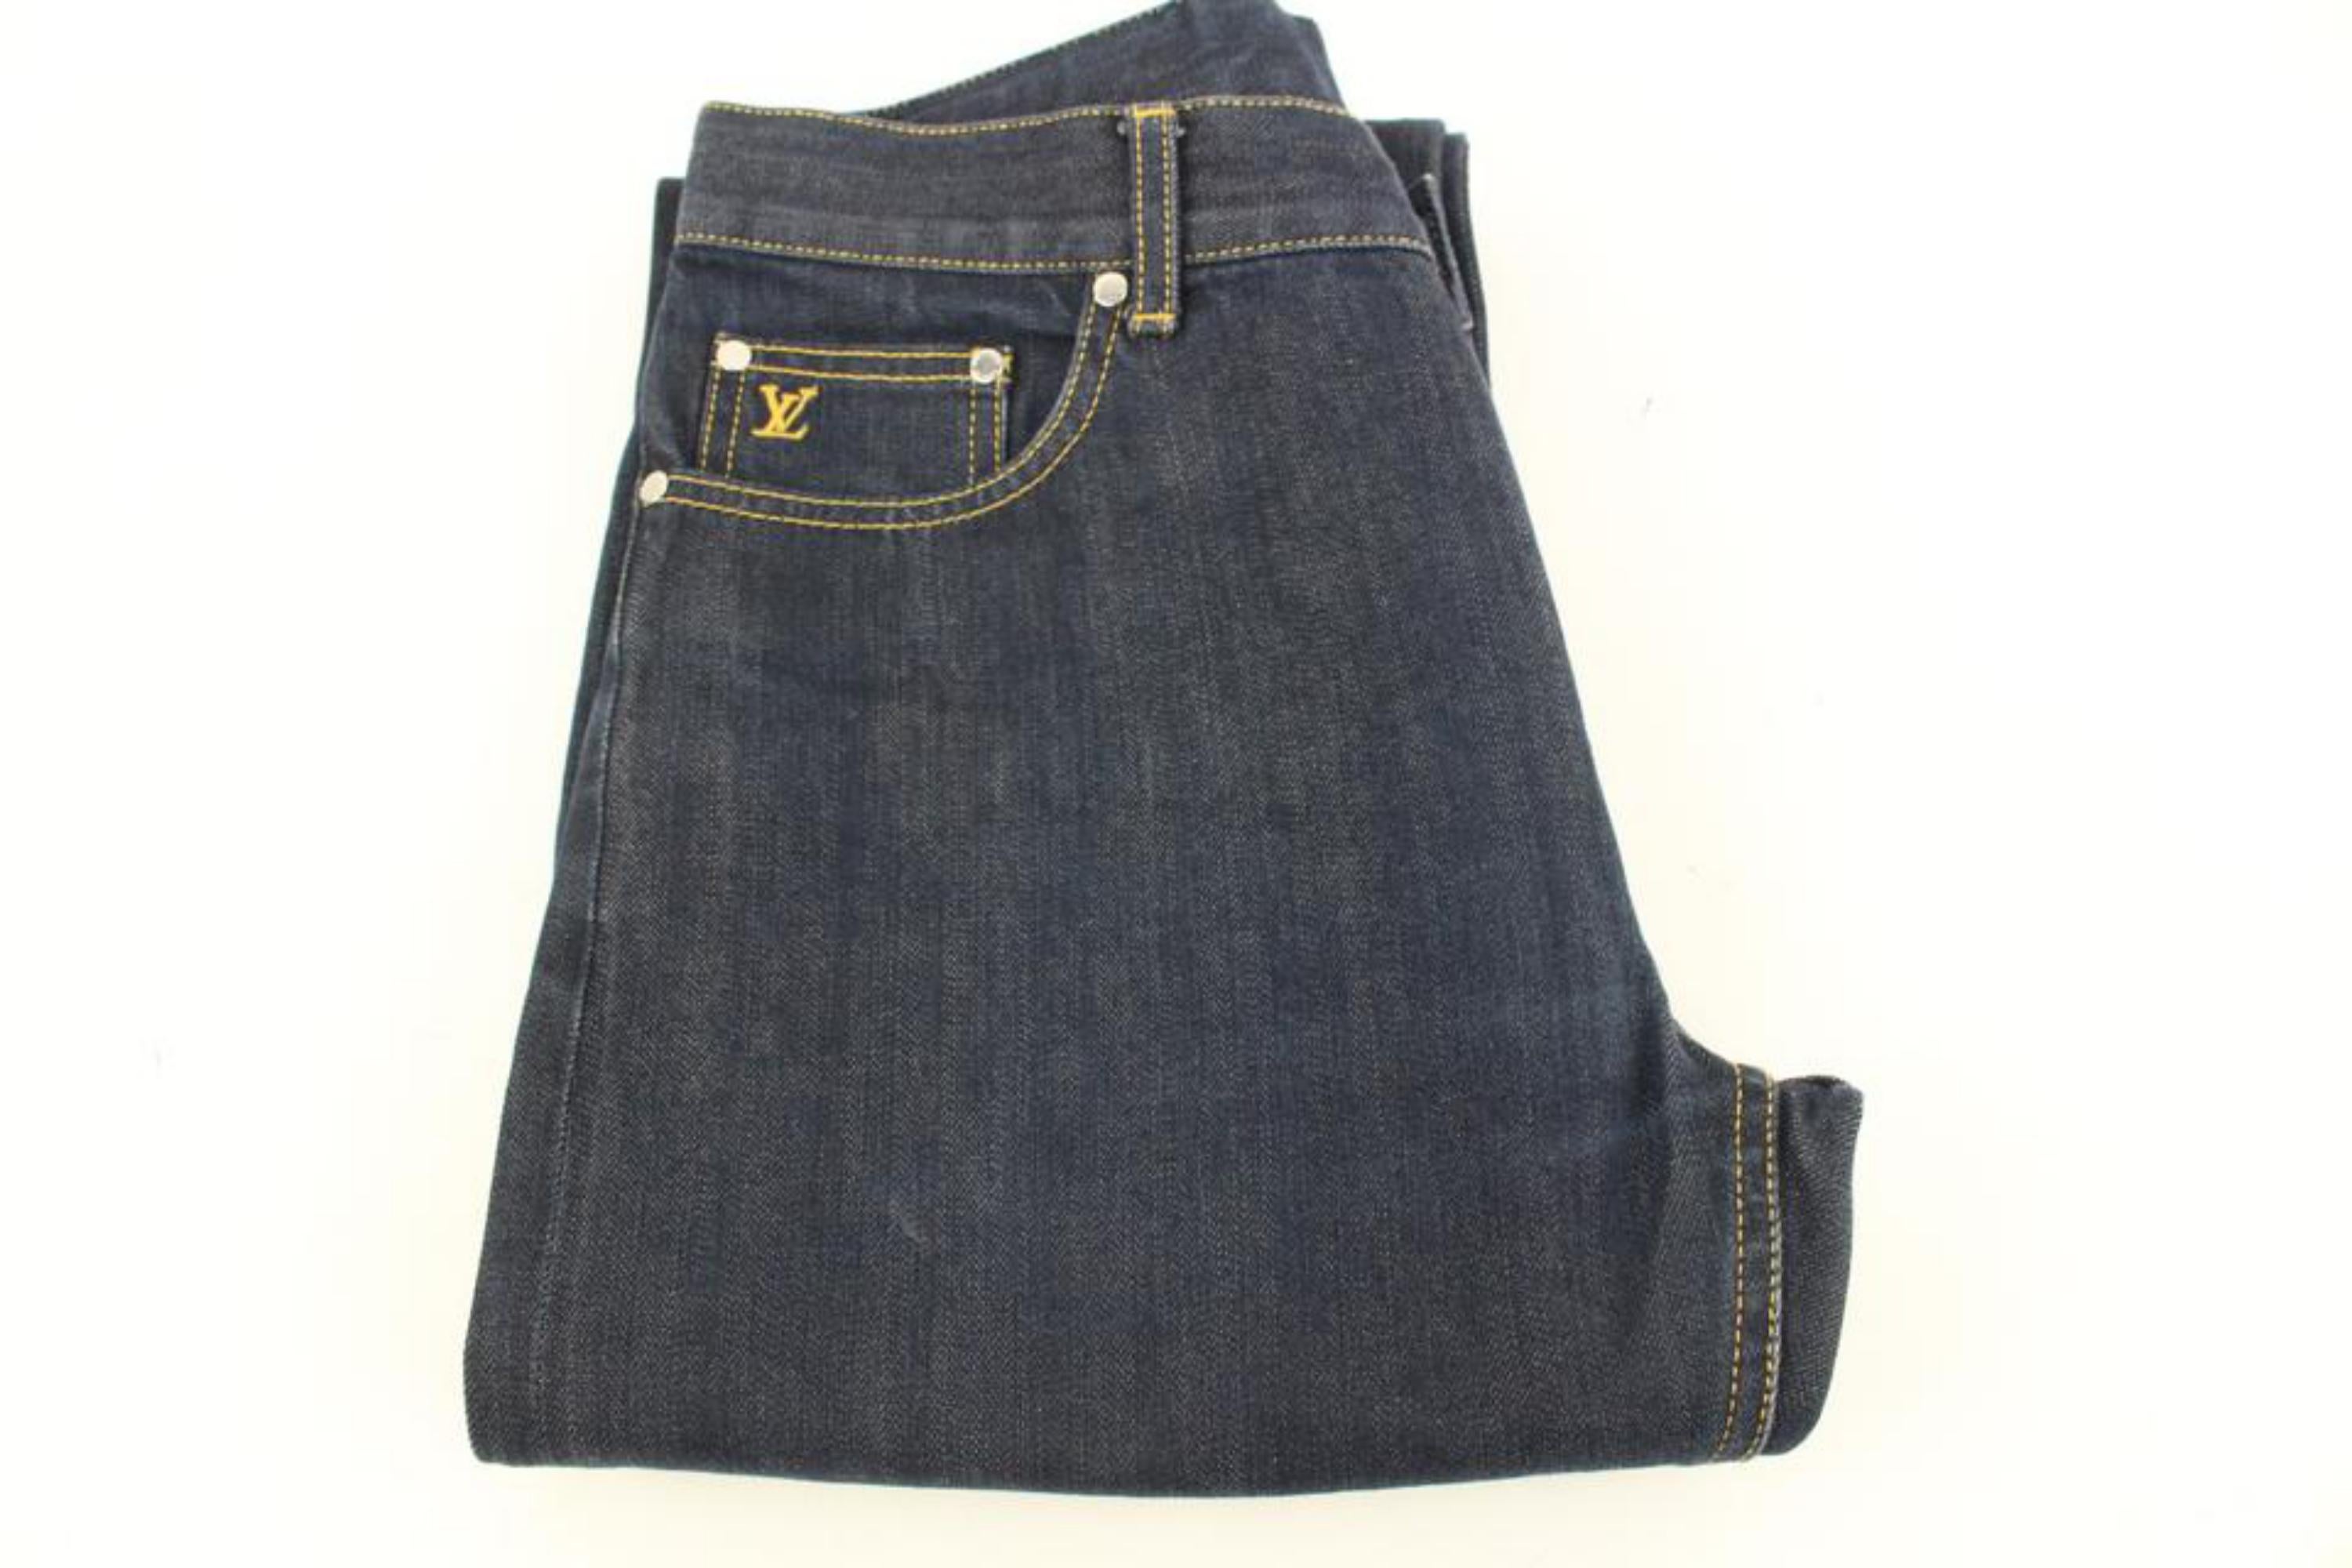 Louis Vuitton Men's Size 30 US Dark Rinse LV Fleur Logo Jeans 119lv8 In Excellent Condition For Sale In Dix hills, NY